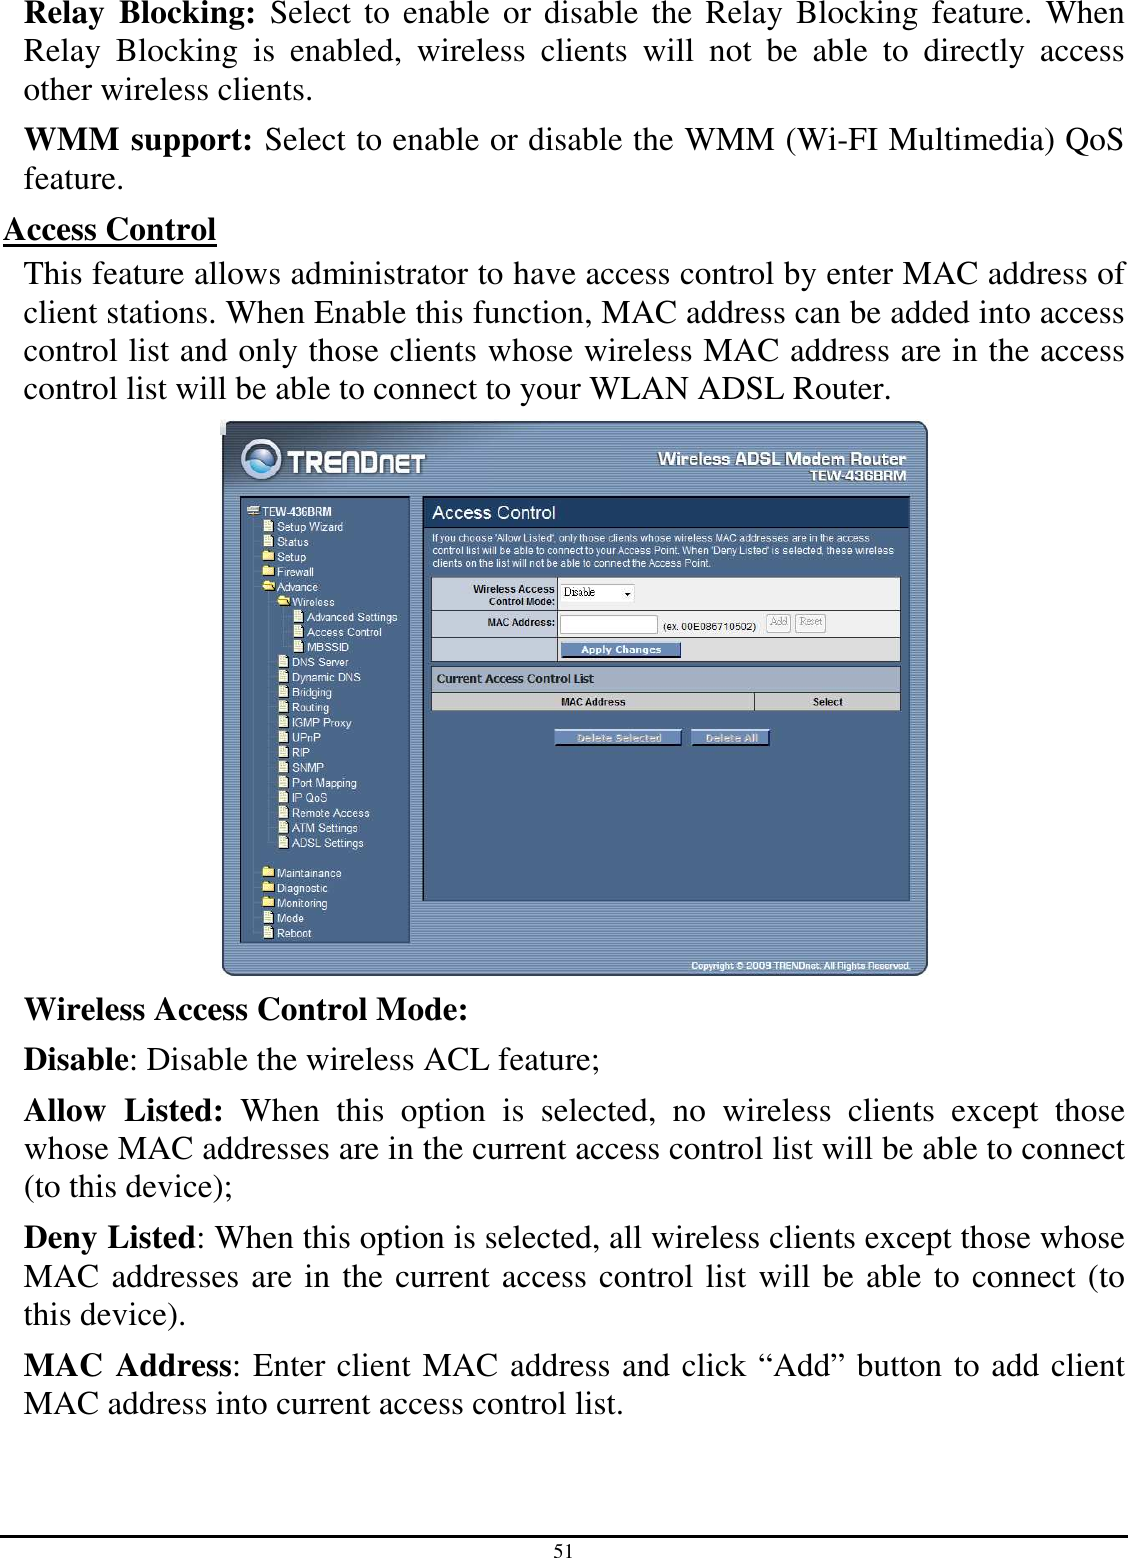 51 Relay  Blocking:  Select to  enable or  disable the  Relay Blocking feature.  When Relay  Blocking  is  enabled,  wireless  clients  will  not  be  able  to  directly  access other wireless clients. WMM support: Select to enable or disable the WMM (Wi-FI Multimedia) QoS feature. Access Control This feature allows administrator to have access control by enter MAC address of client stations. When Enable this function, MAC address can be added into access control list and only those clients whose wireless MAC address are in the access control list will be able to connect to your WLAN ADSL Router.  Wireless Access Control Mode:  Disable: Disable the wireless ACL feature;  Allow  Listed:  When  this  option  is  selected,  no  wireless  clients  except  those whose MAC addresses are in the current access control list will be able to connect (to this device);  Deny Listed: When this option is selected, all wireless clients except those whose MAC addresses are in the current access control list will be able to connect (to this device). MAC Address: Enter client MAC address and click “Add” button to add client MAC address into current access control list. 